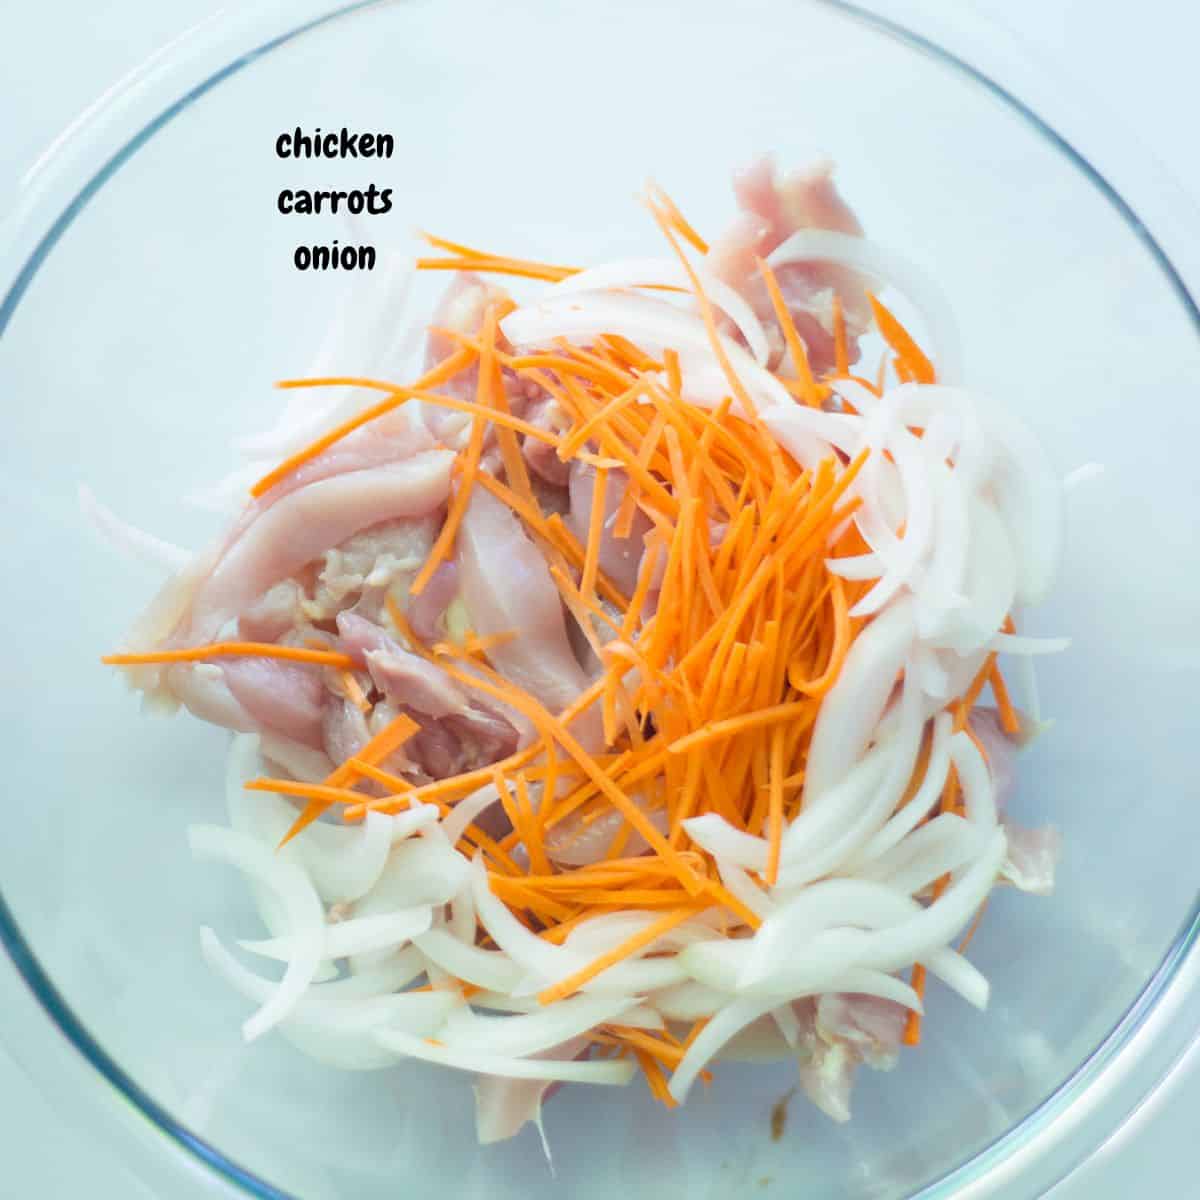 Sliced chicken, carrots, and onion in a large bowl.